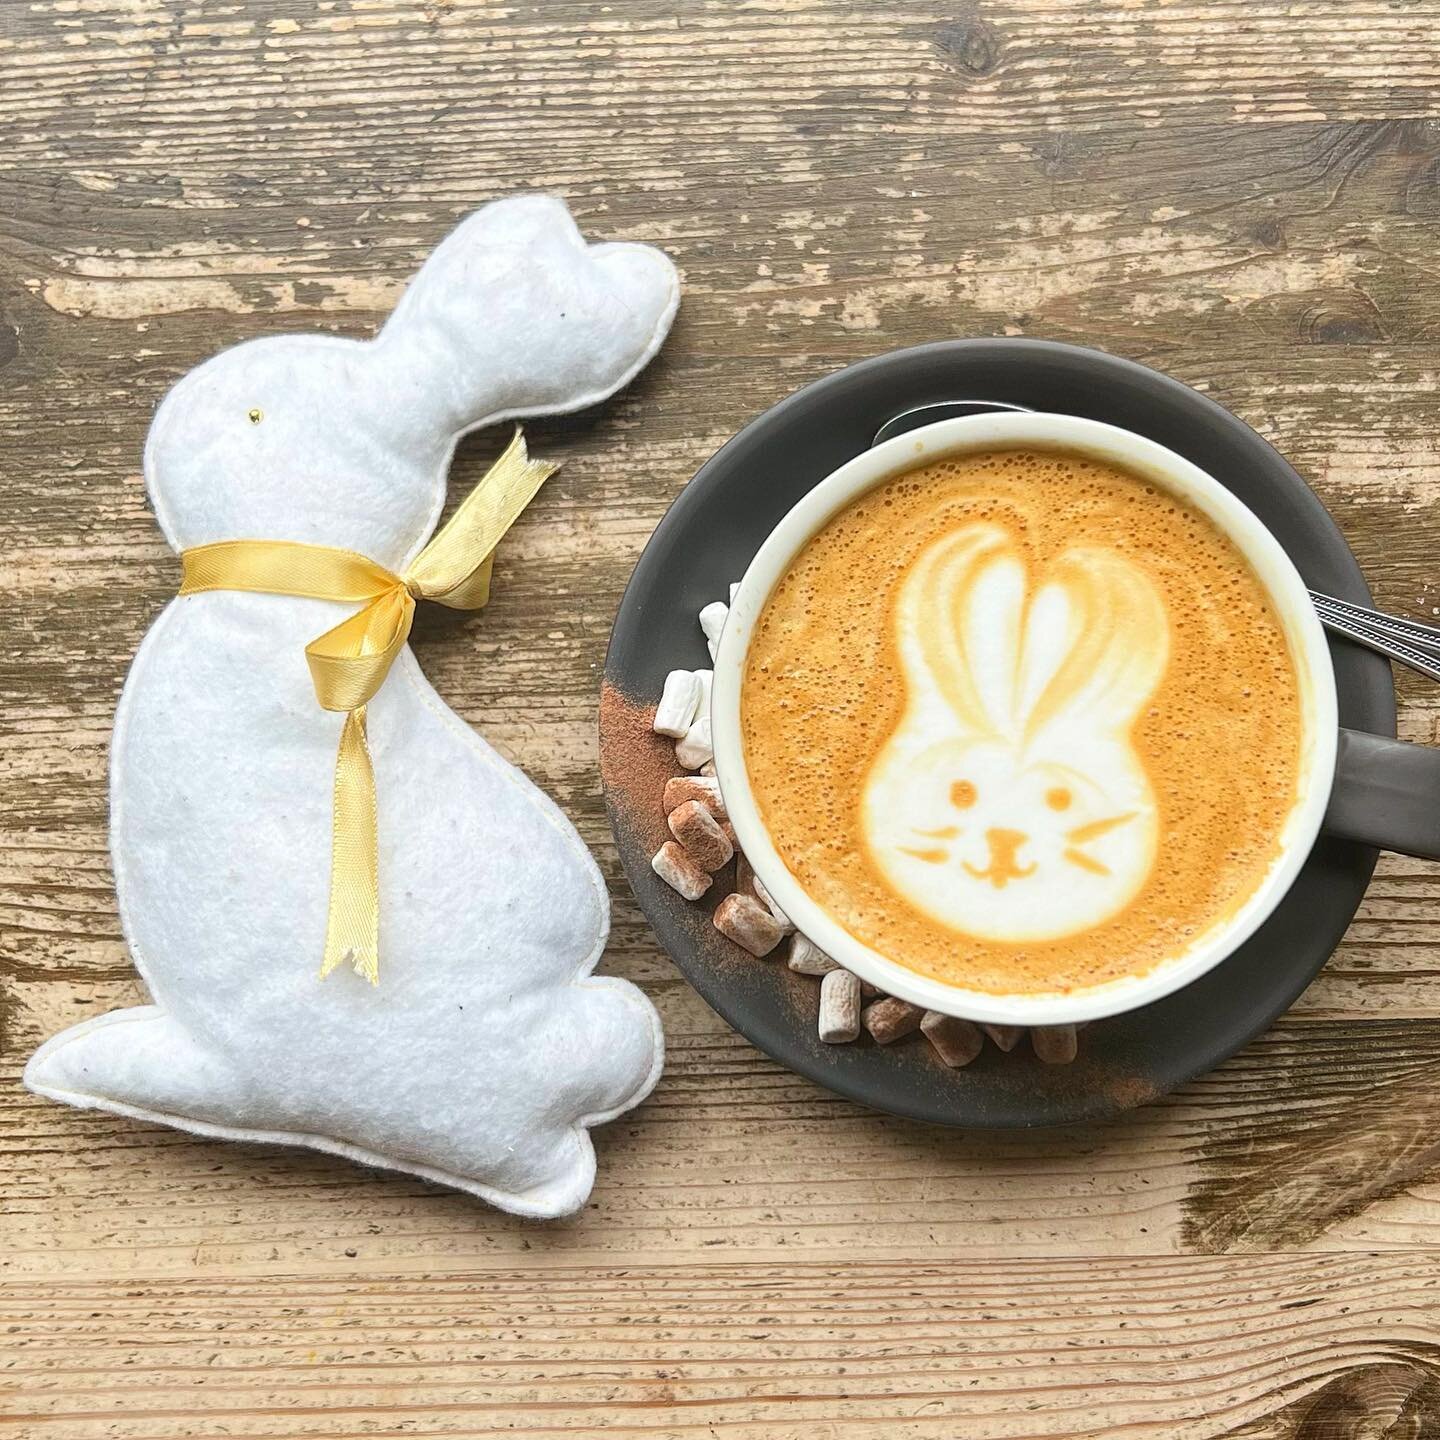 Happy Easter, everyone! 🐰🐣 We hope you're all having a wonderful day filled with joy and happiness. Just a quick reminder that we are closed today to celebrate the holiday with our loved ones. But don't worry, we'll be back tomorrow at 10am to serv